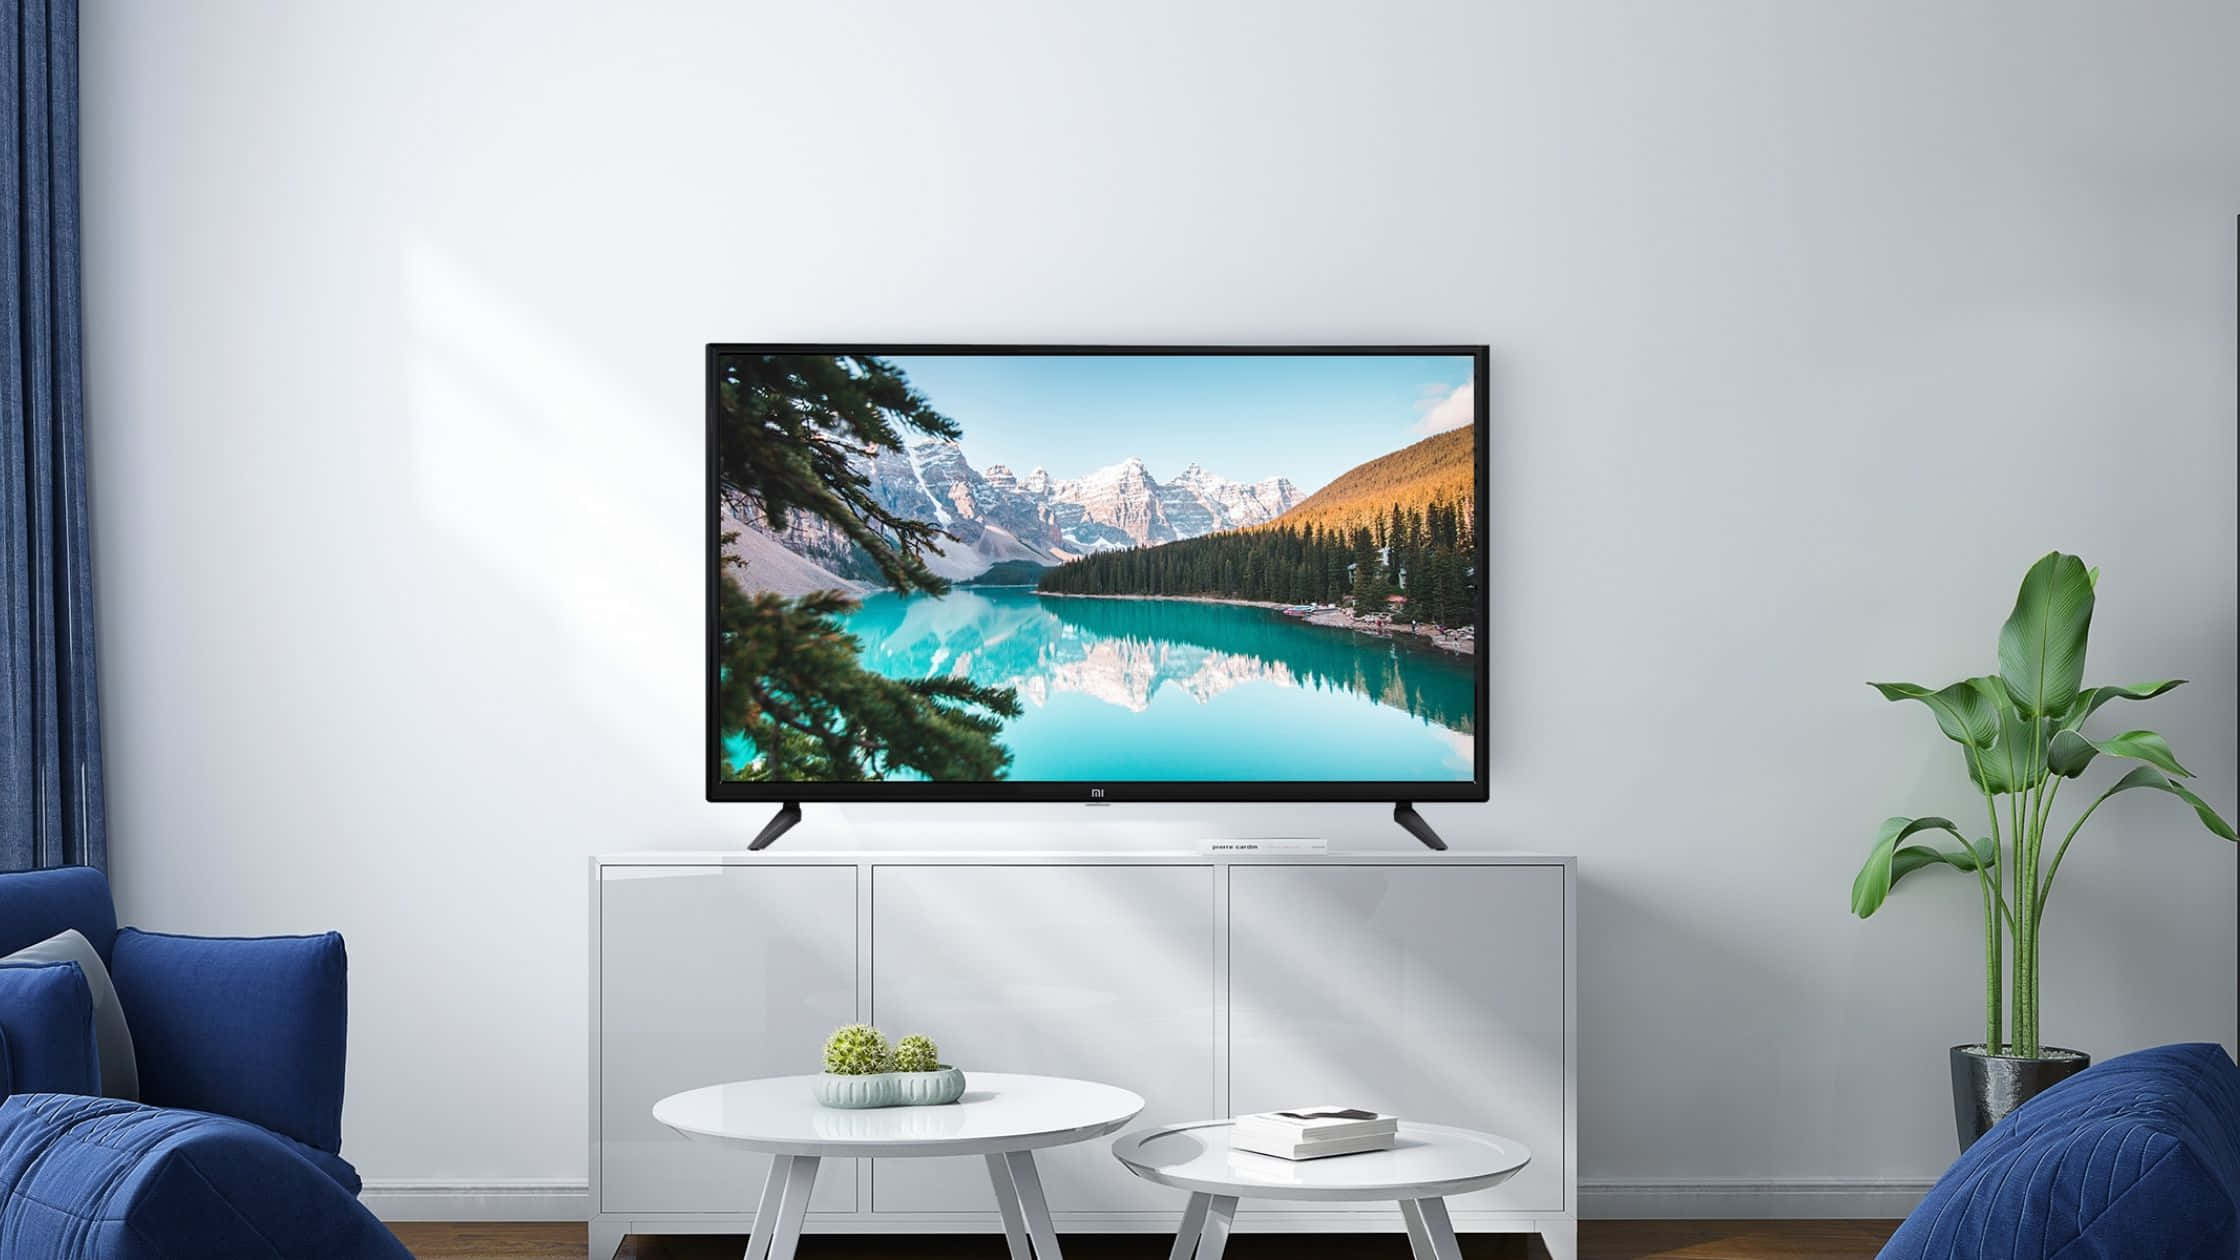 Turn your living room into a home theater with today's top TVs.